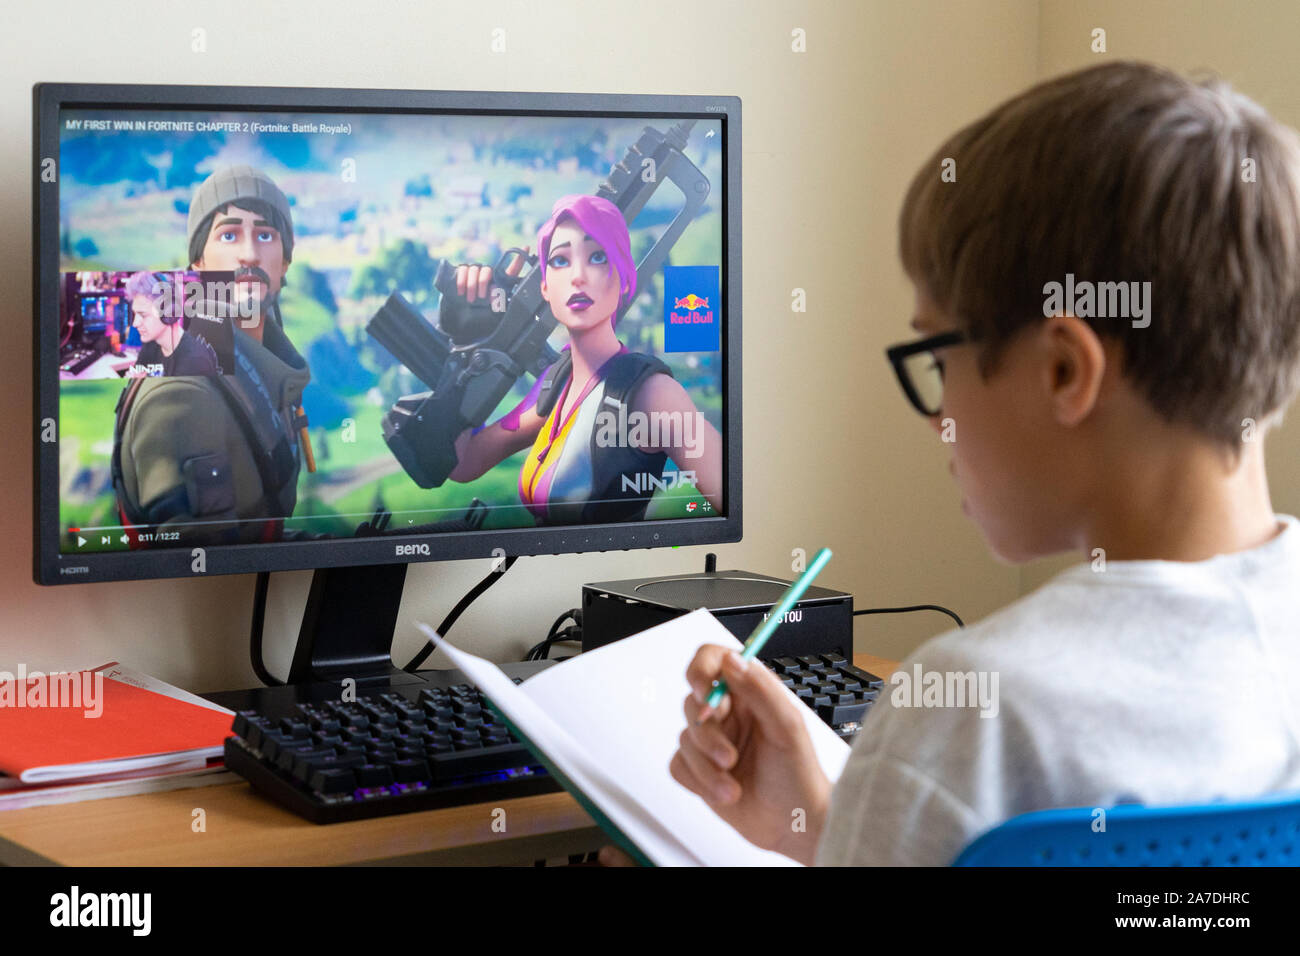 Boy doing homework and watching people play strategy video games and streaming on YouTube. Vilnius, Lithuania - 19 October 2019 Stock Photo